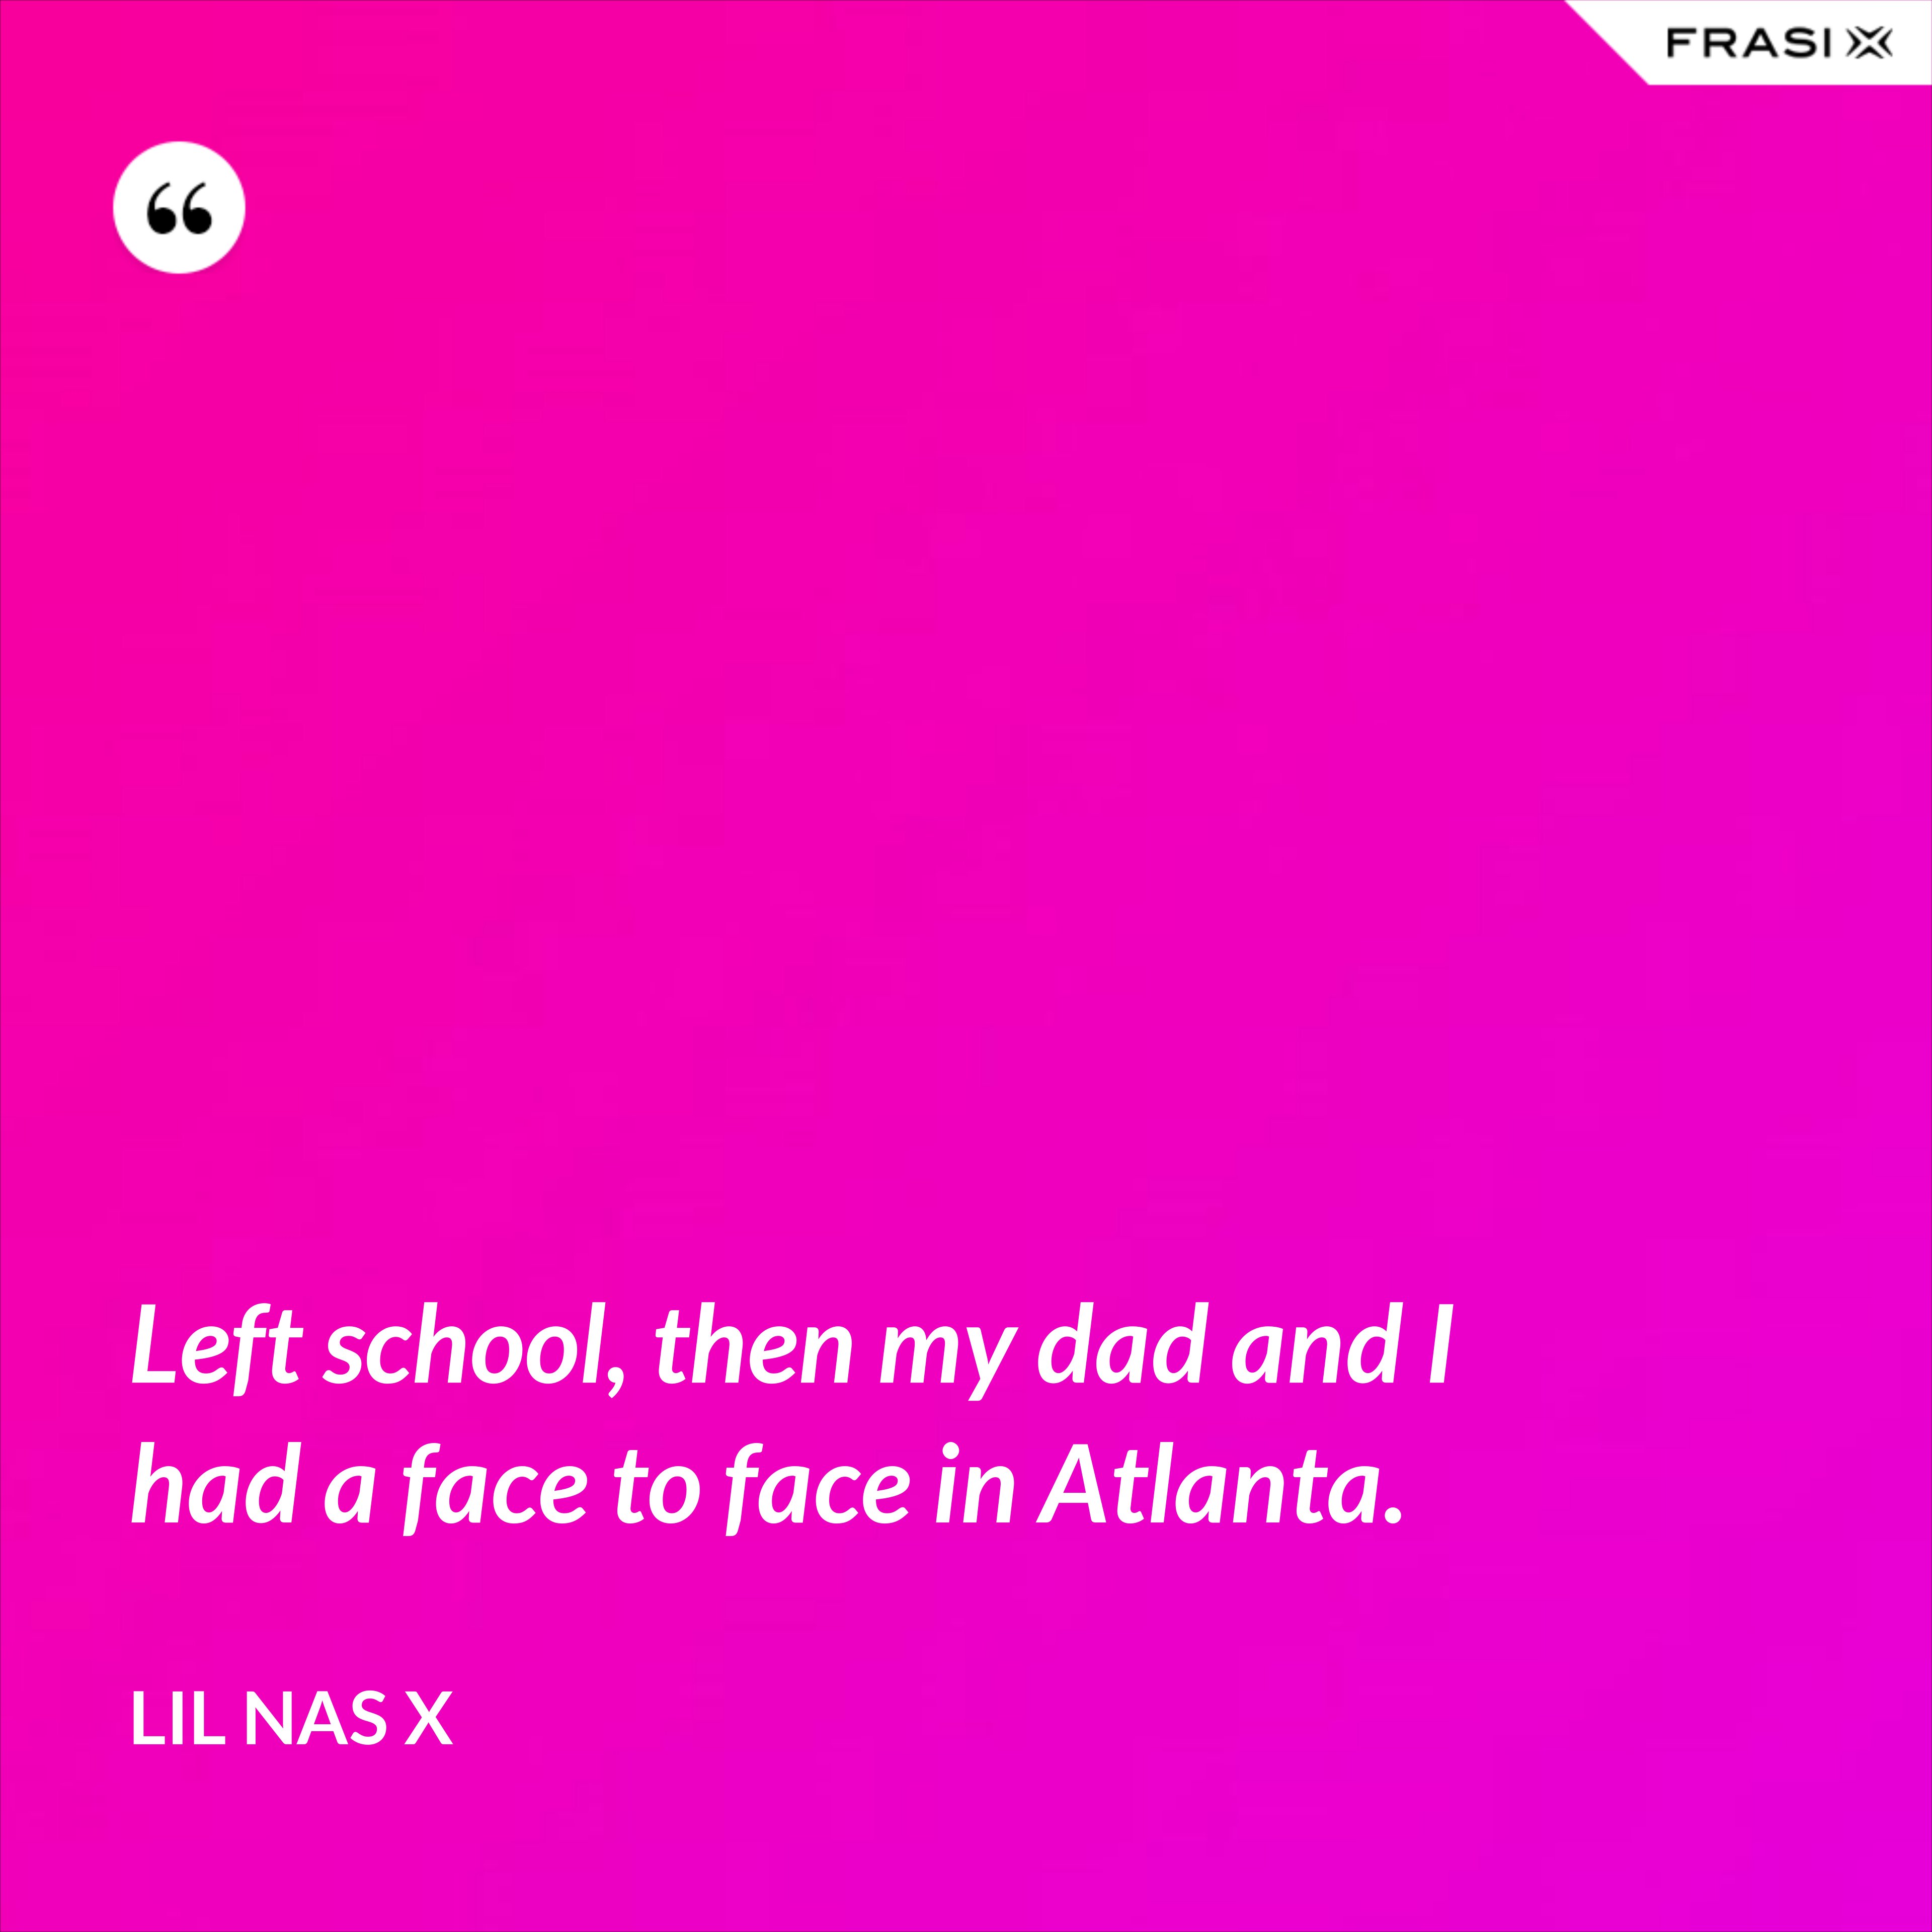 Left school, then my dad and I had a face to face in Atlanta. - Lil Nas X